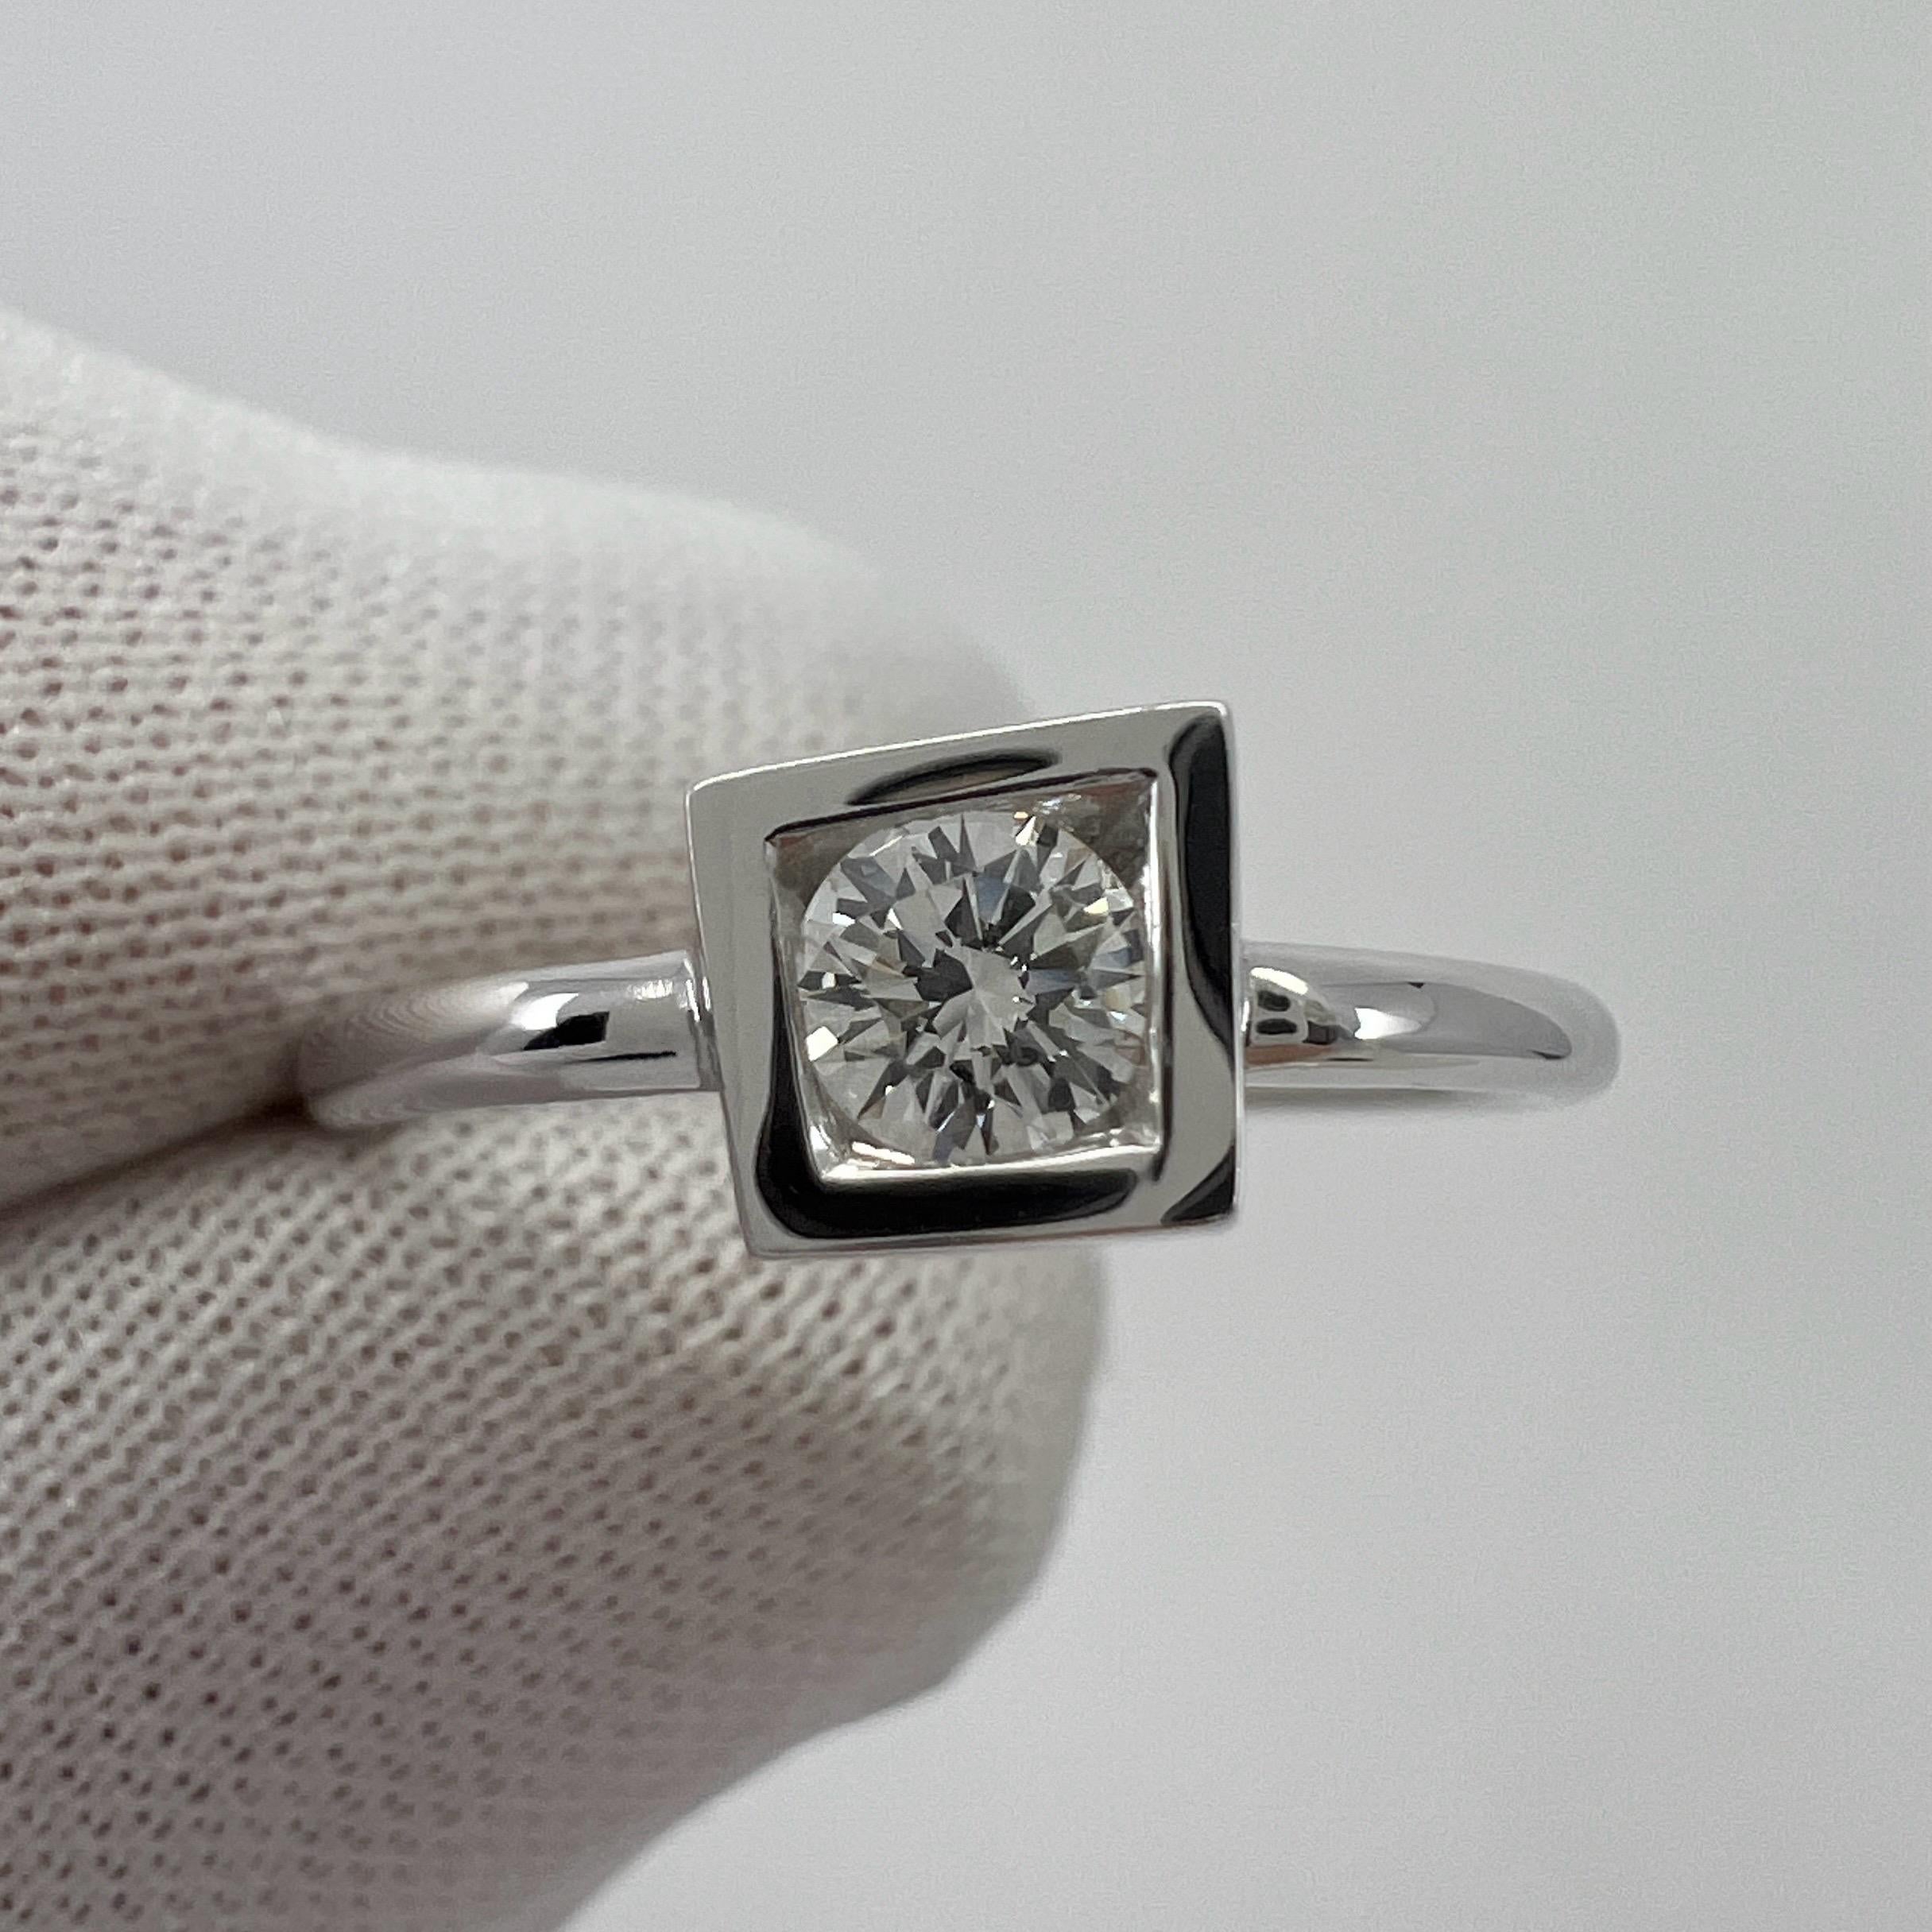 Rare Tiffany & Co Frank Gehry Torque Round Diamond 18k White Gold Solitaire Ring For Sale 6